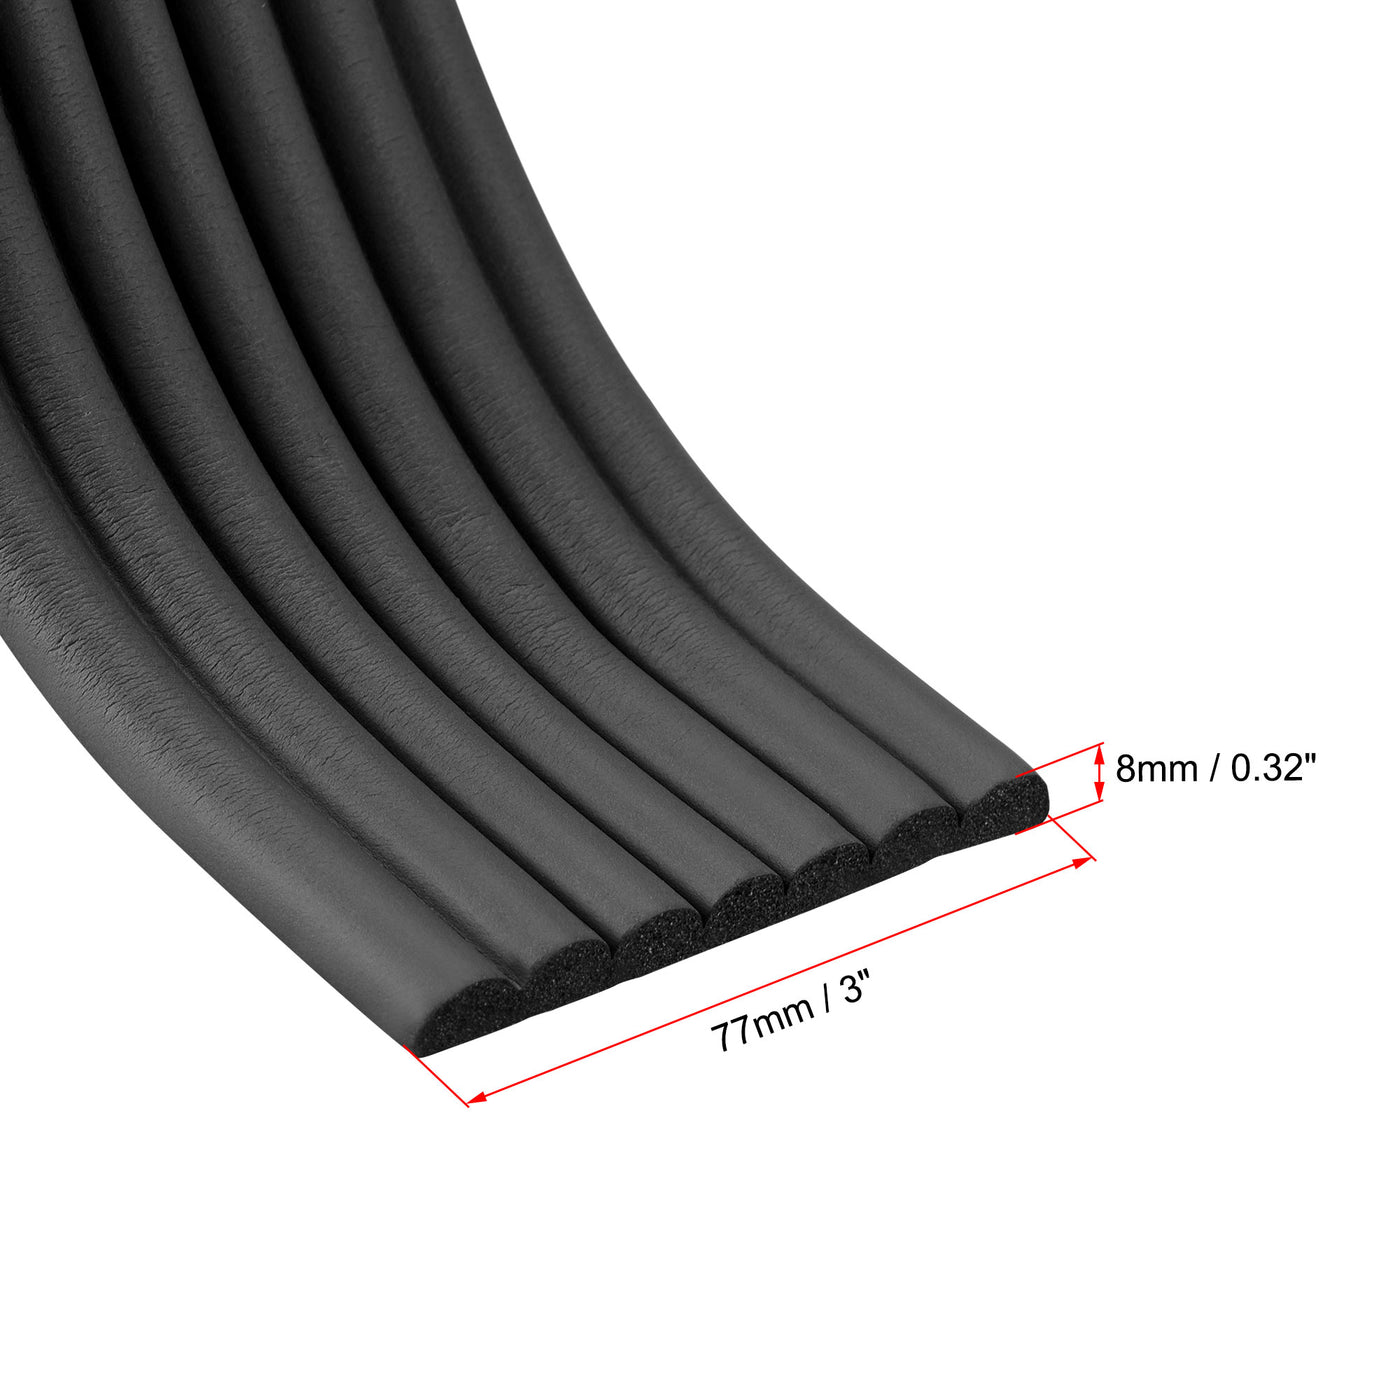 uxcell Uxcell Furniture Table Edge Protectors W-Shape Soft NBR Anti-collision Strip with Tape, 2 Meters Length Black, 2pcs